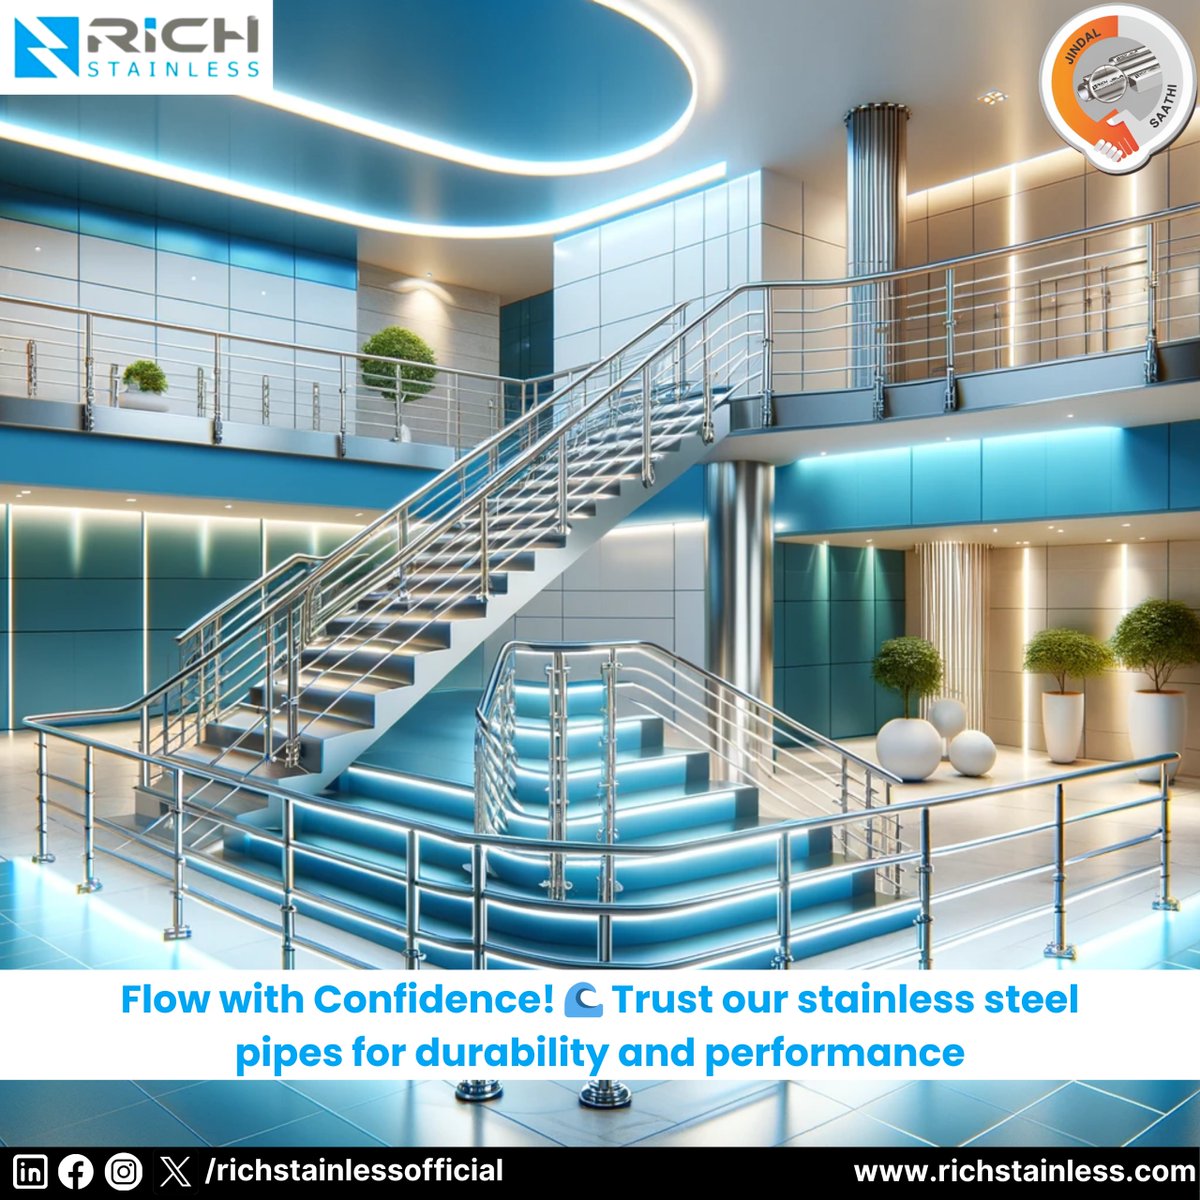 Your trusted partner for all things stainless steel. #stainlesssteelpipe #richstainless #jindalsteel #metalfabrication #stainlesssteelstaircase #architecture